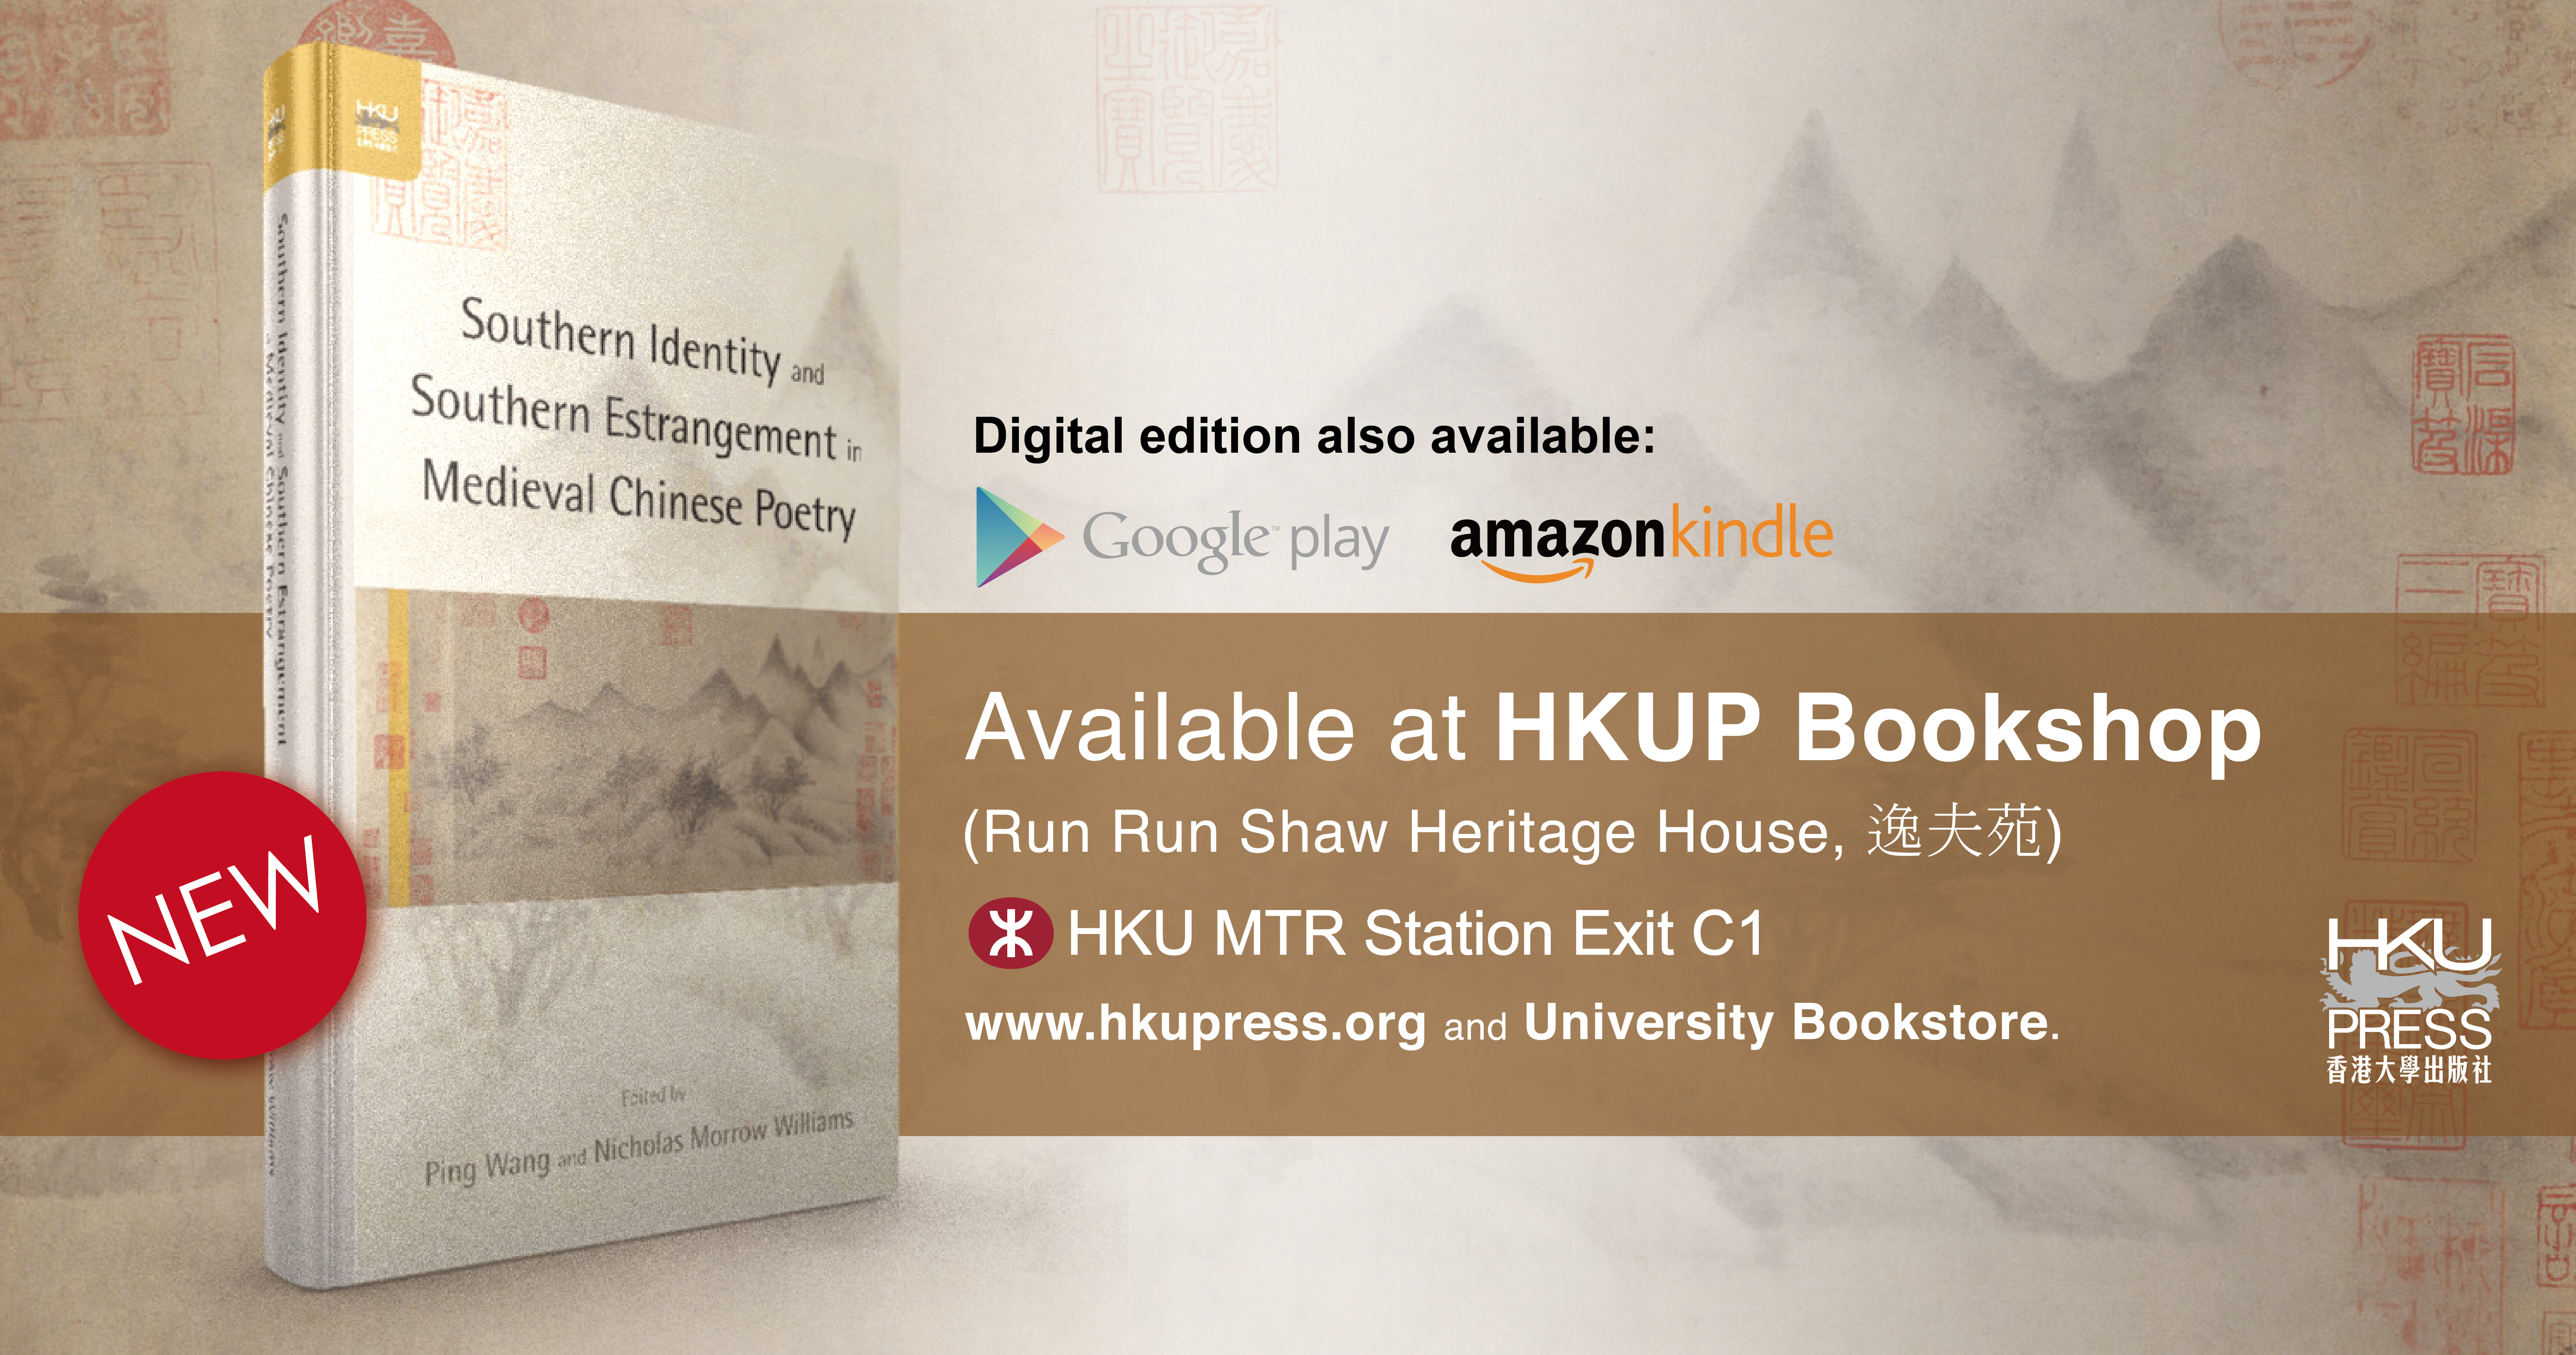 HKU Press - New Book Release: Southern Identity and Southern Estrangement in Medieval Chinese Poetry